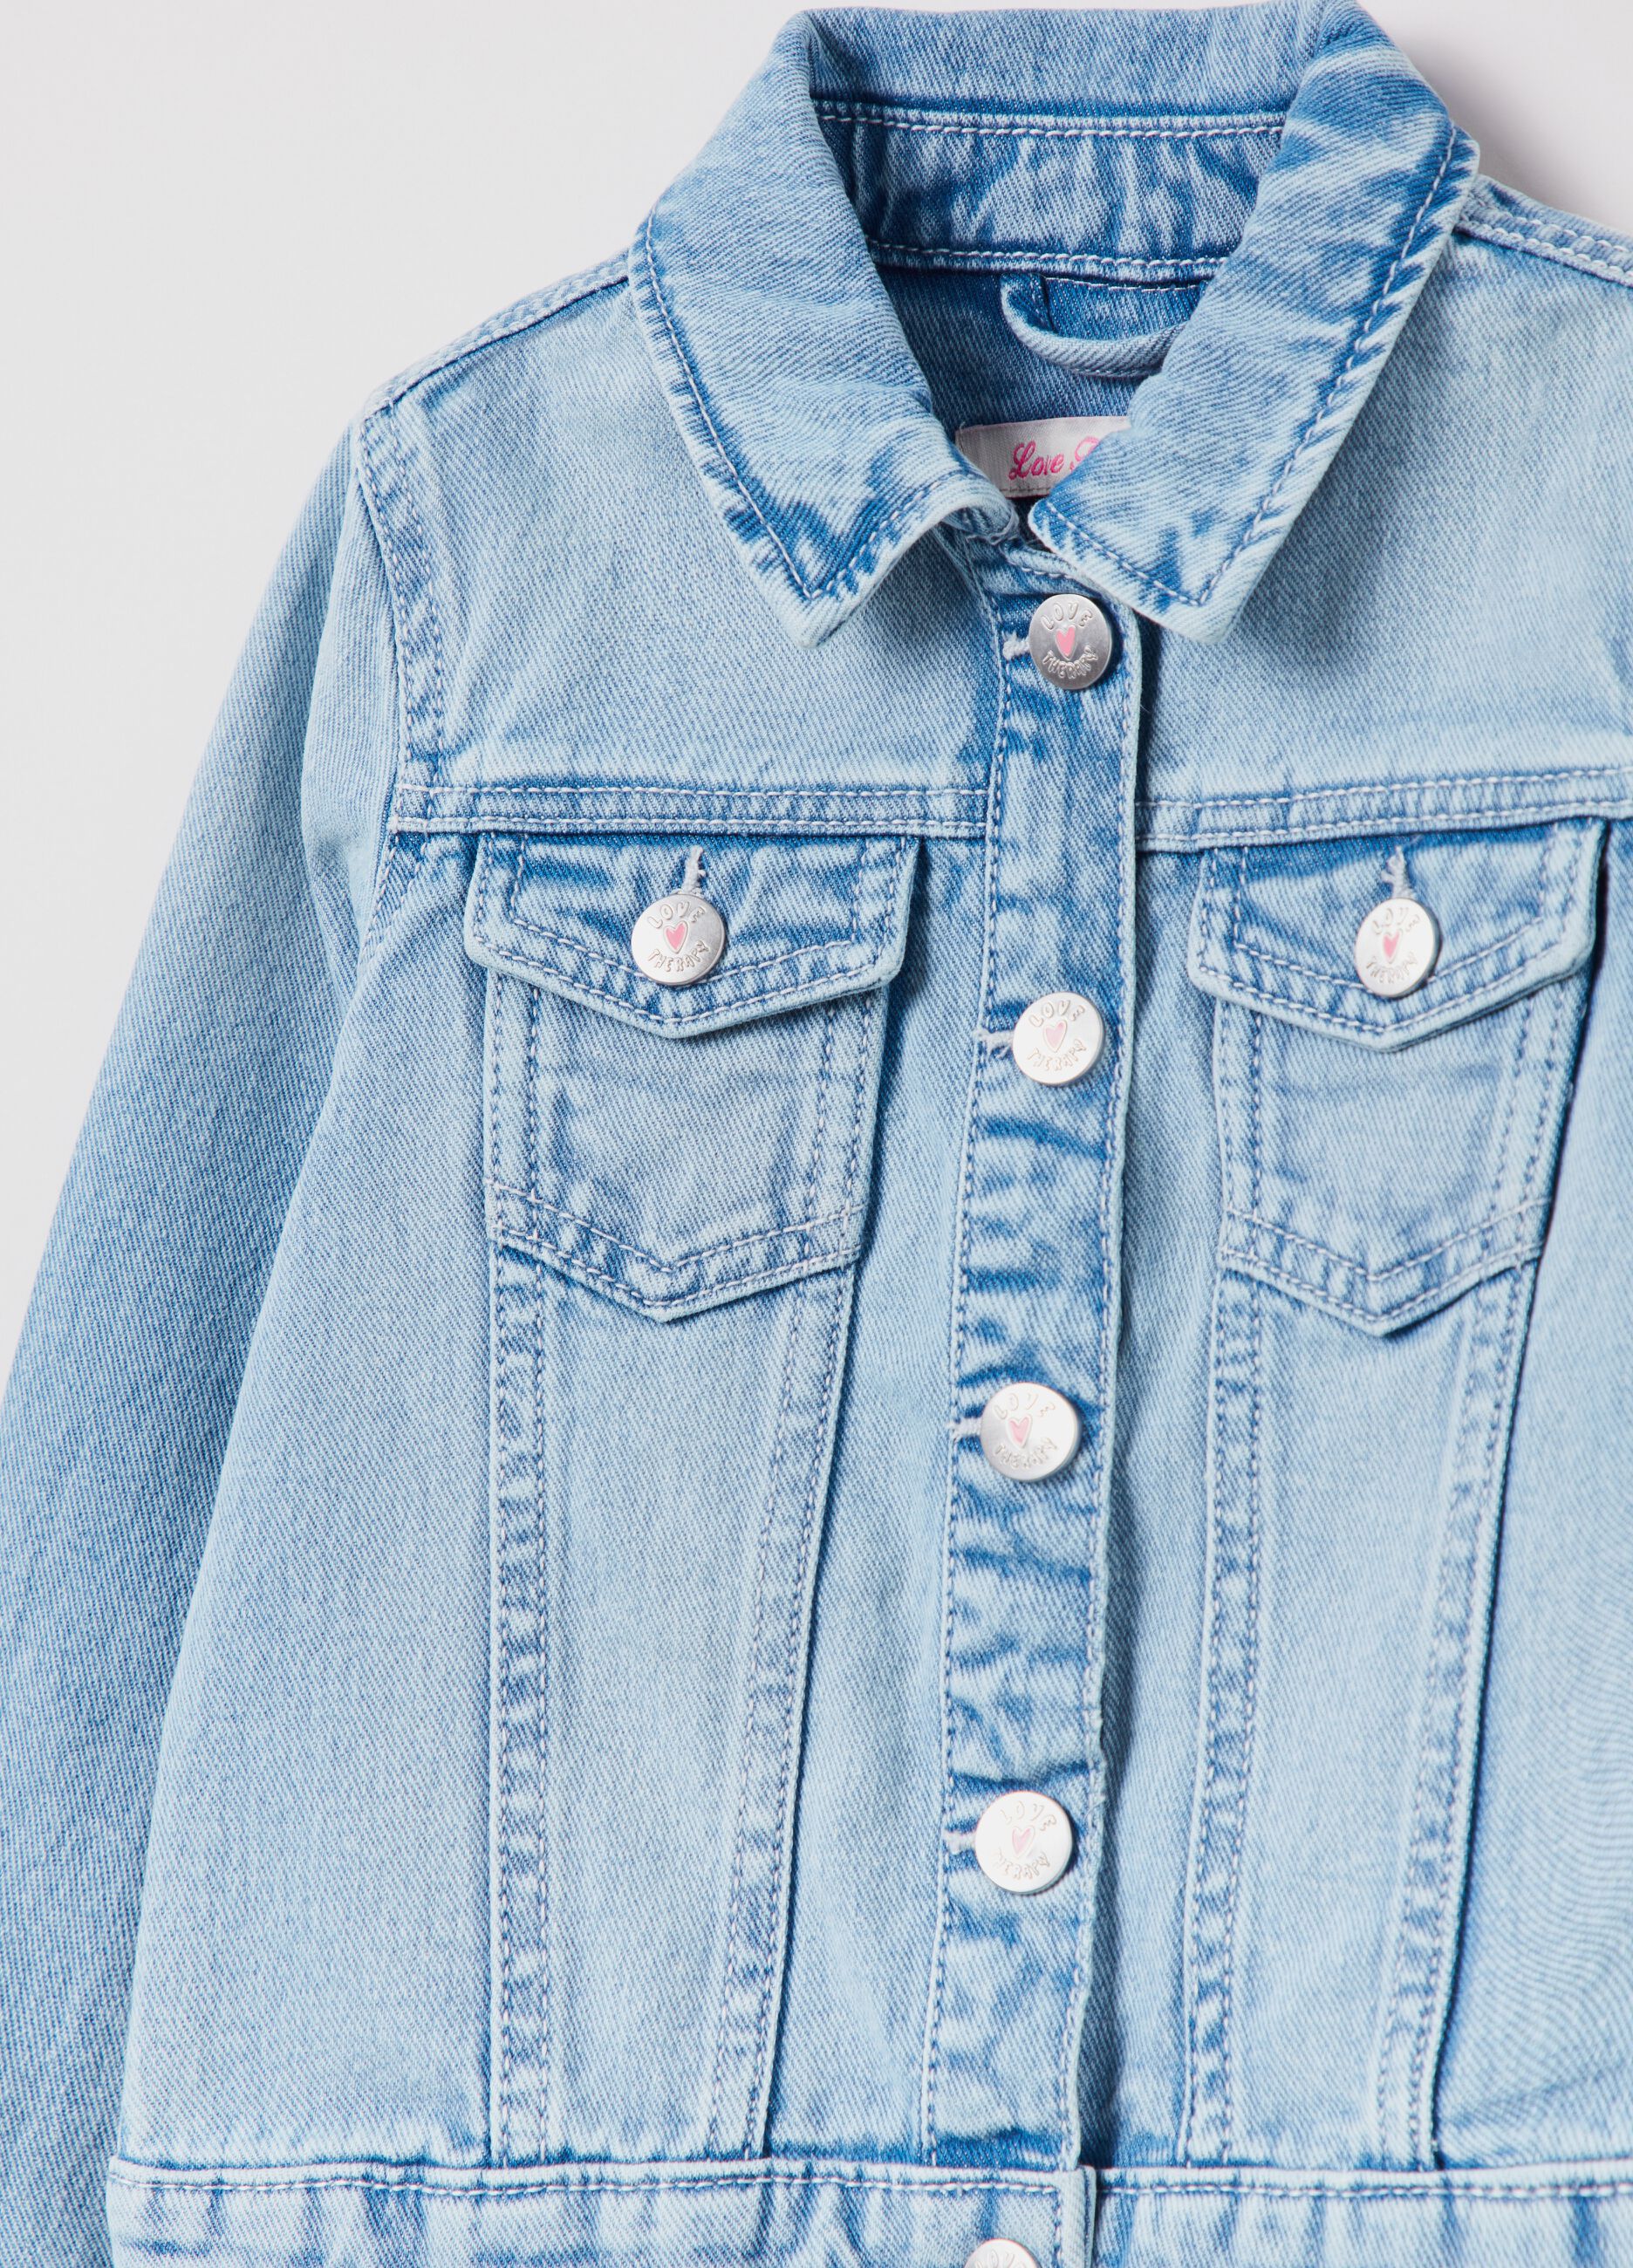 Denim jacket with Love Therapy embroidery